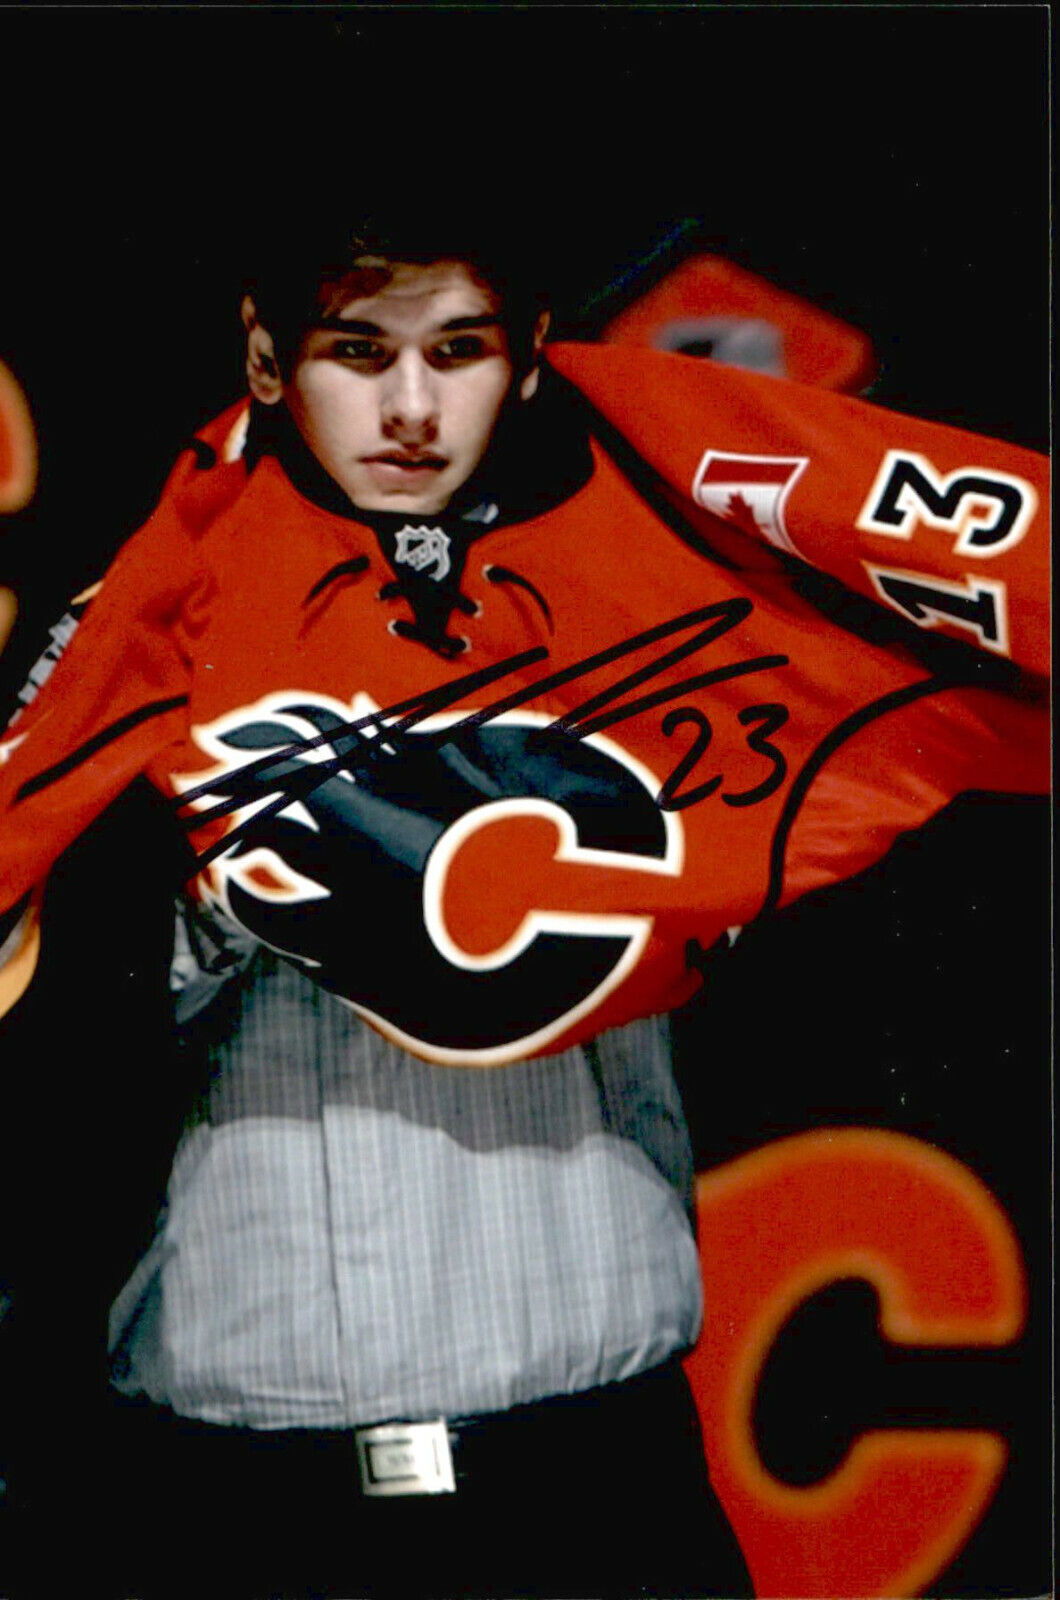 Sean Monahan SIGNED autographed 4x6 Photo Poster painting CALGARY FLAMES #3